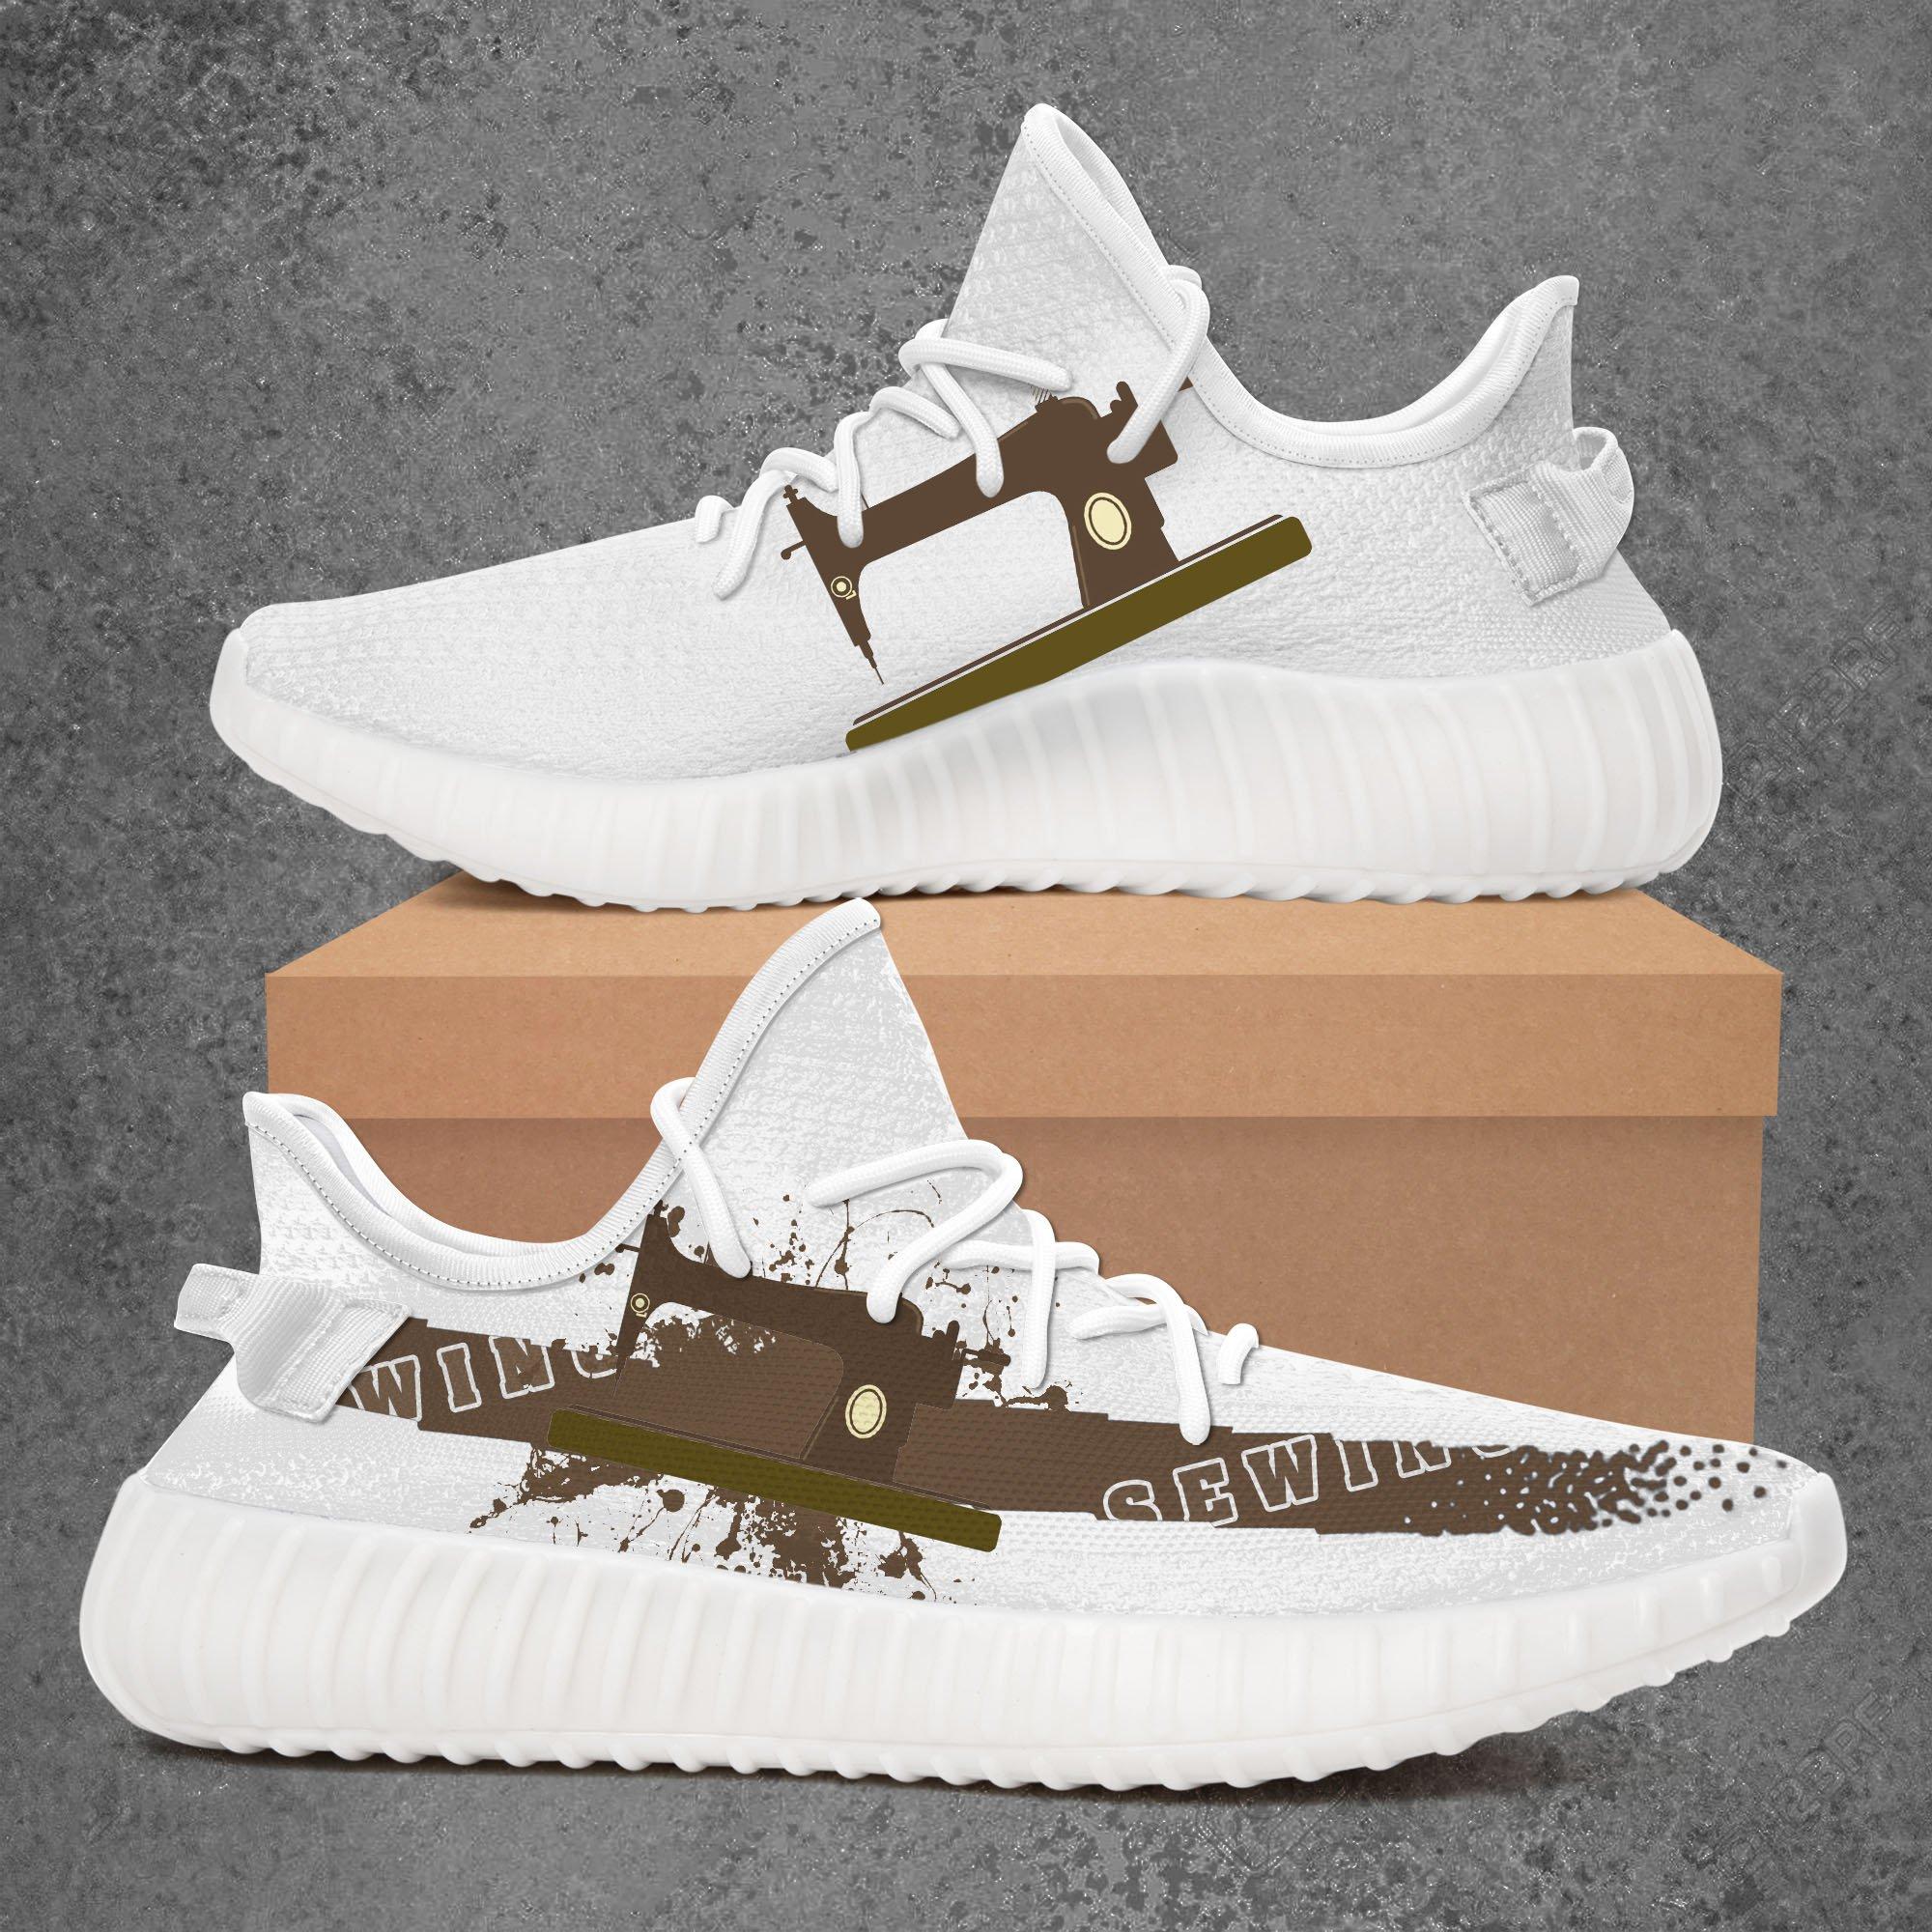 Sewing Yeezy Boost 350 v2 Shoes Top Branding Trends 2020 – TTG Store